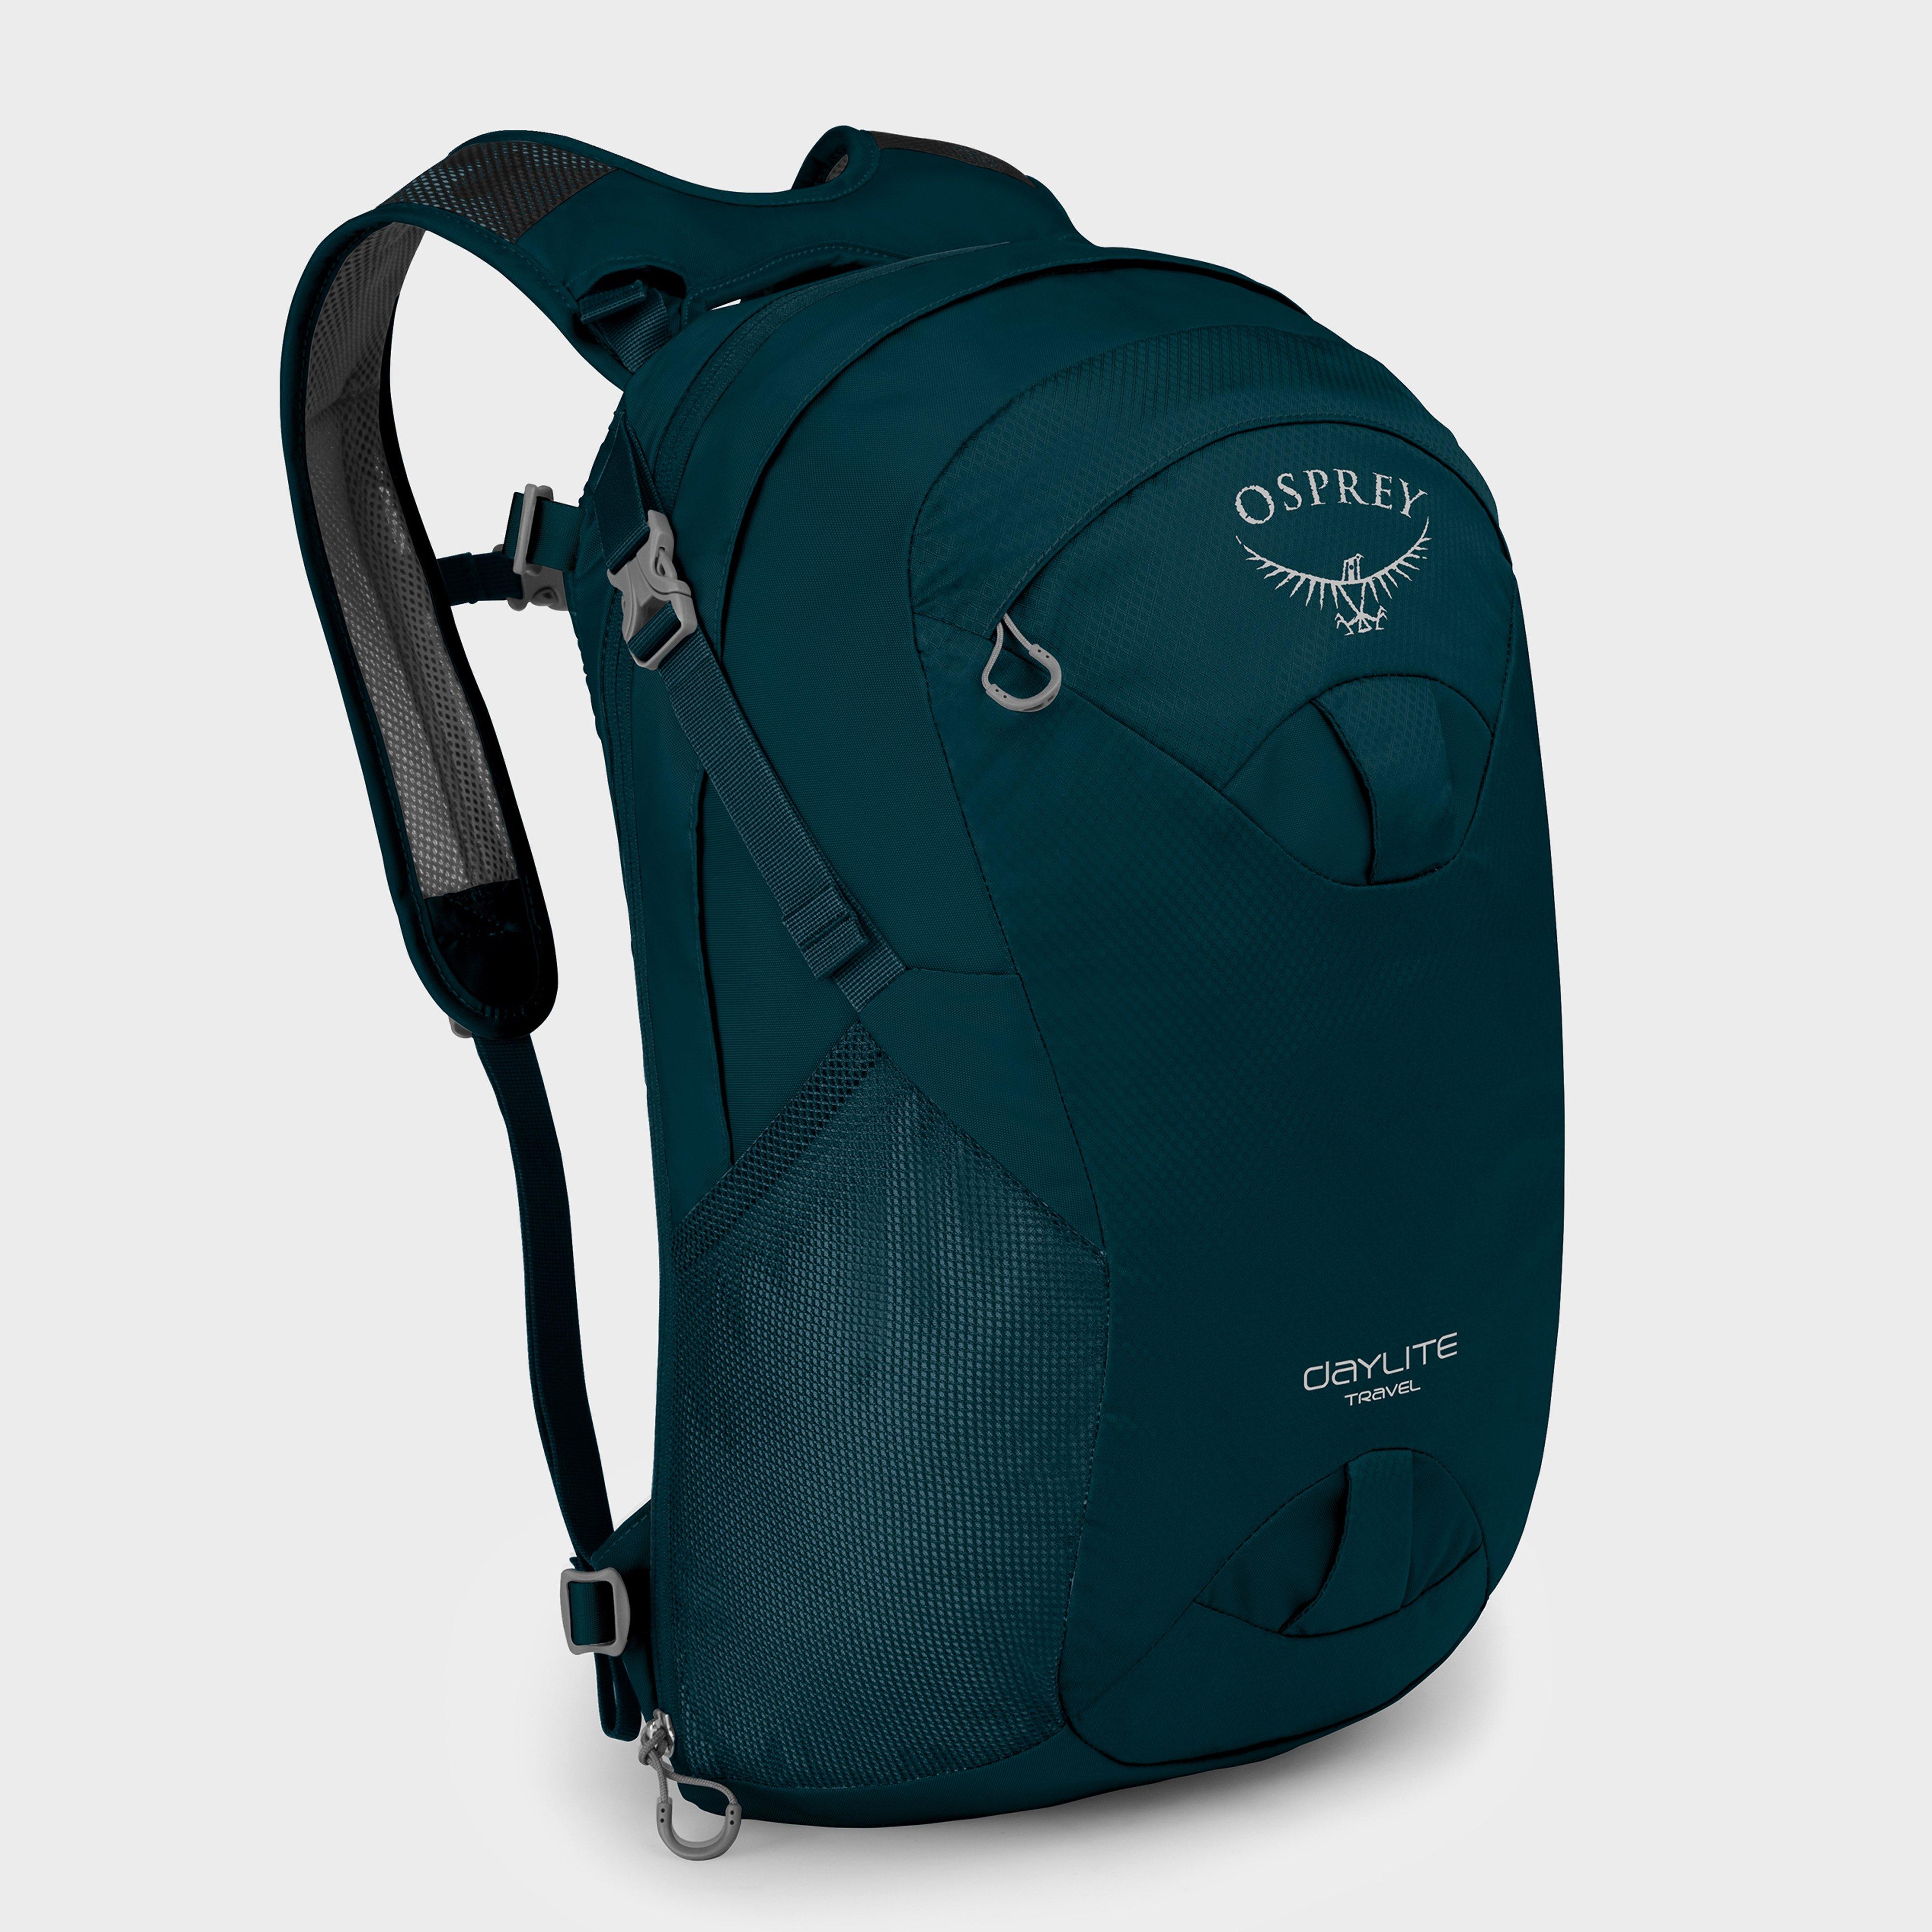 Osprey Daylite Backpack Review